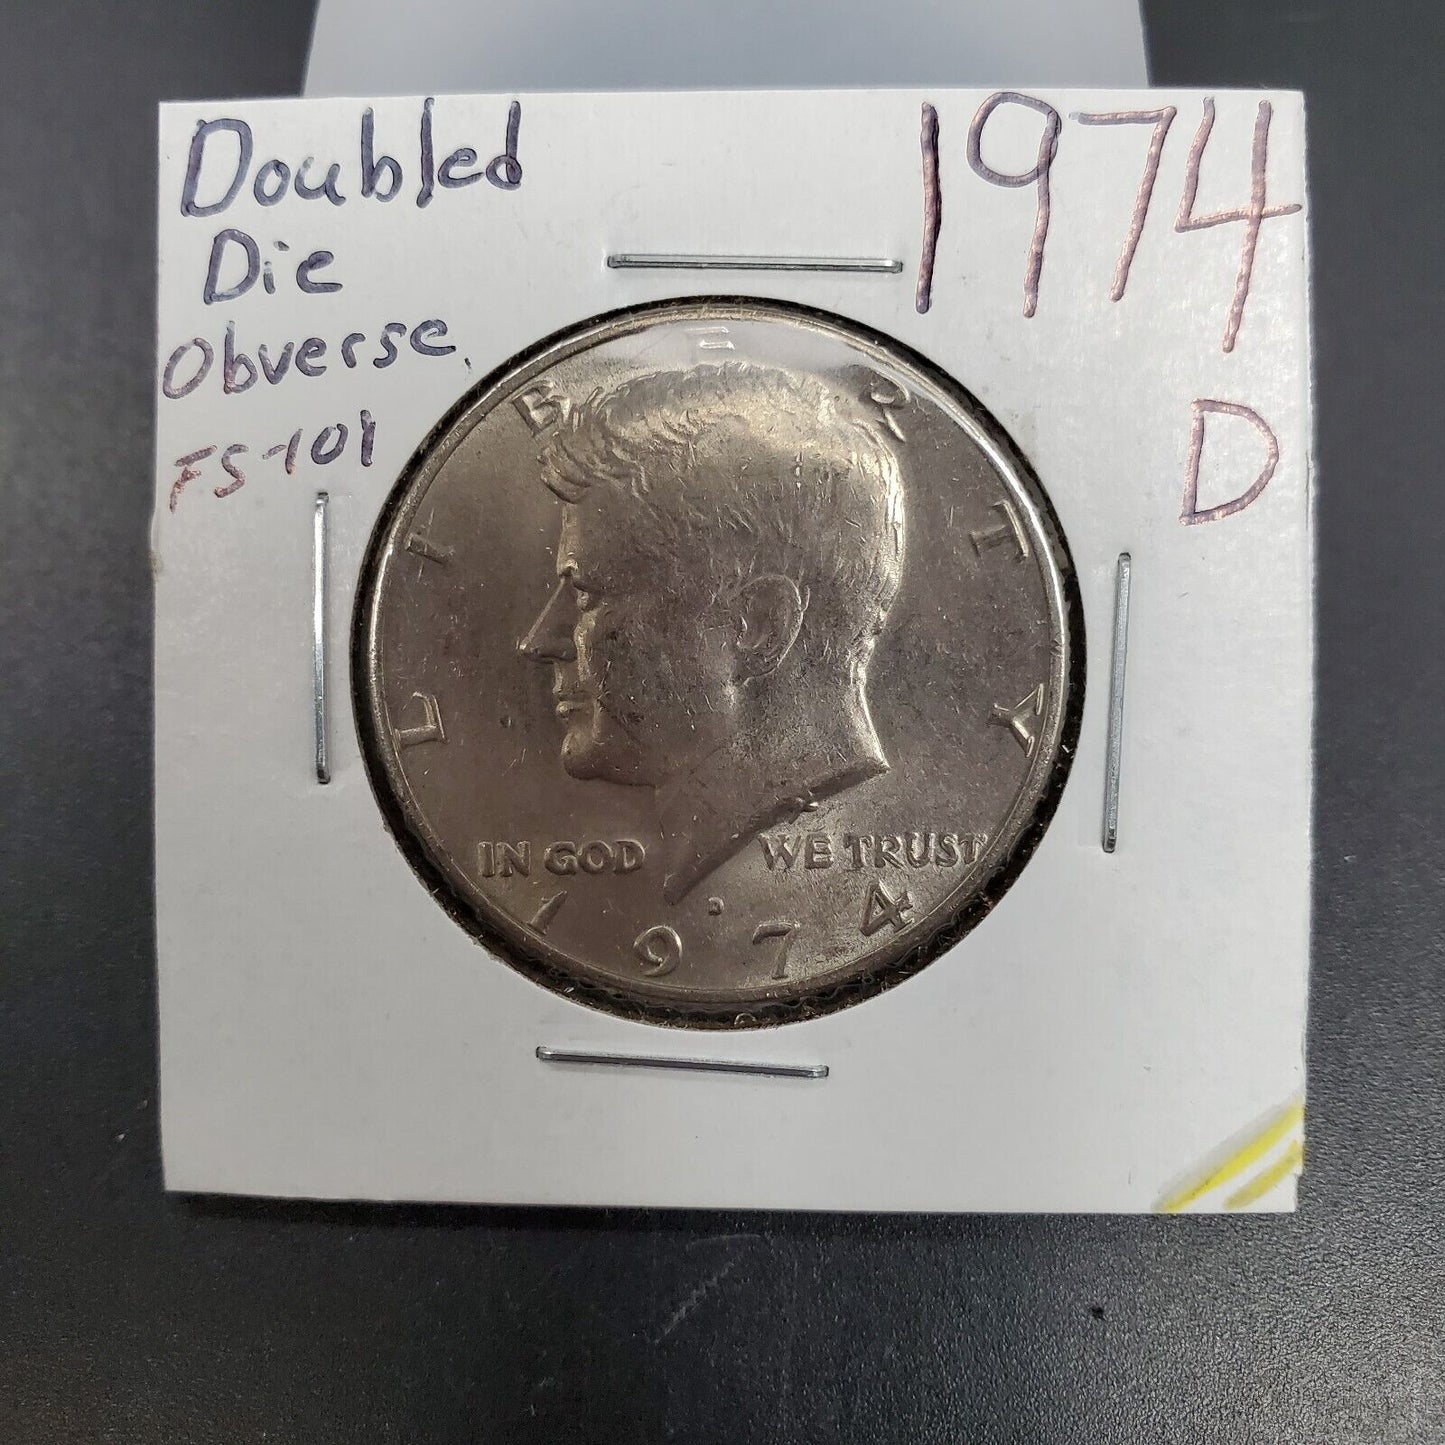 1974 D Kennedy Half Dollar Doubled Die Obv  FS-101 XF Circulated Variety Coin #3